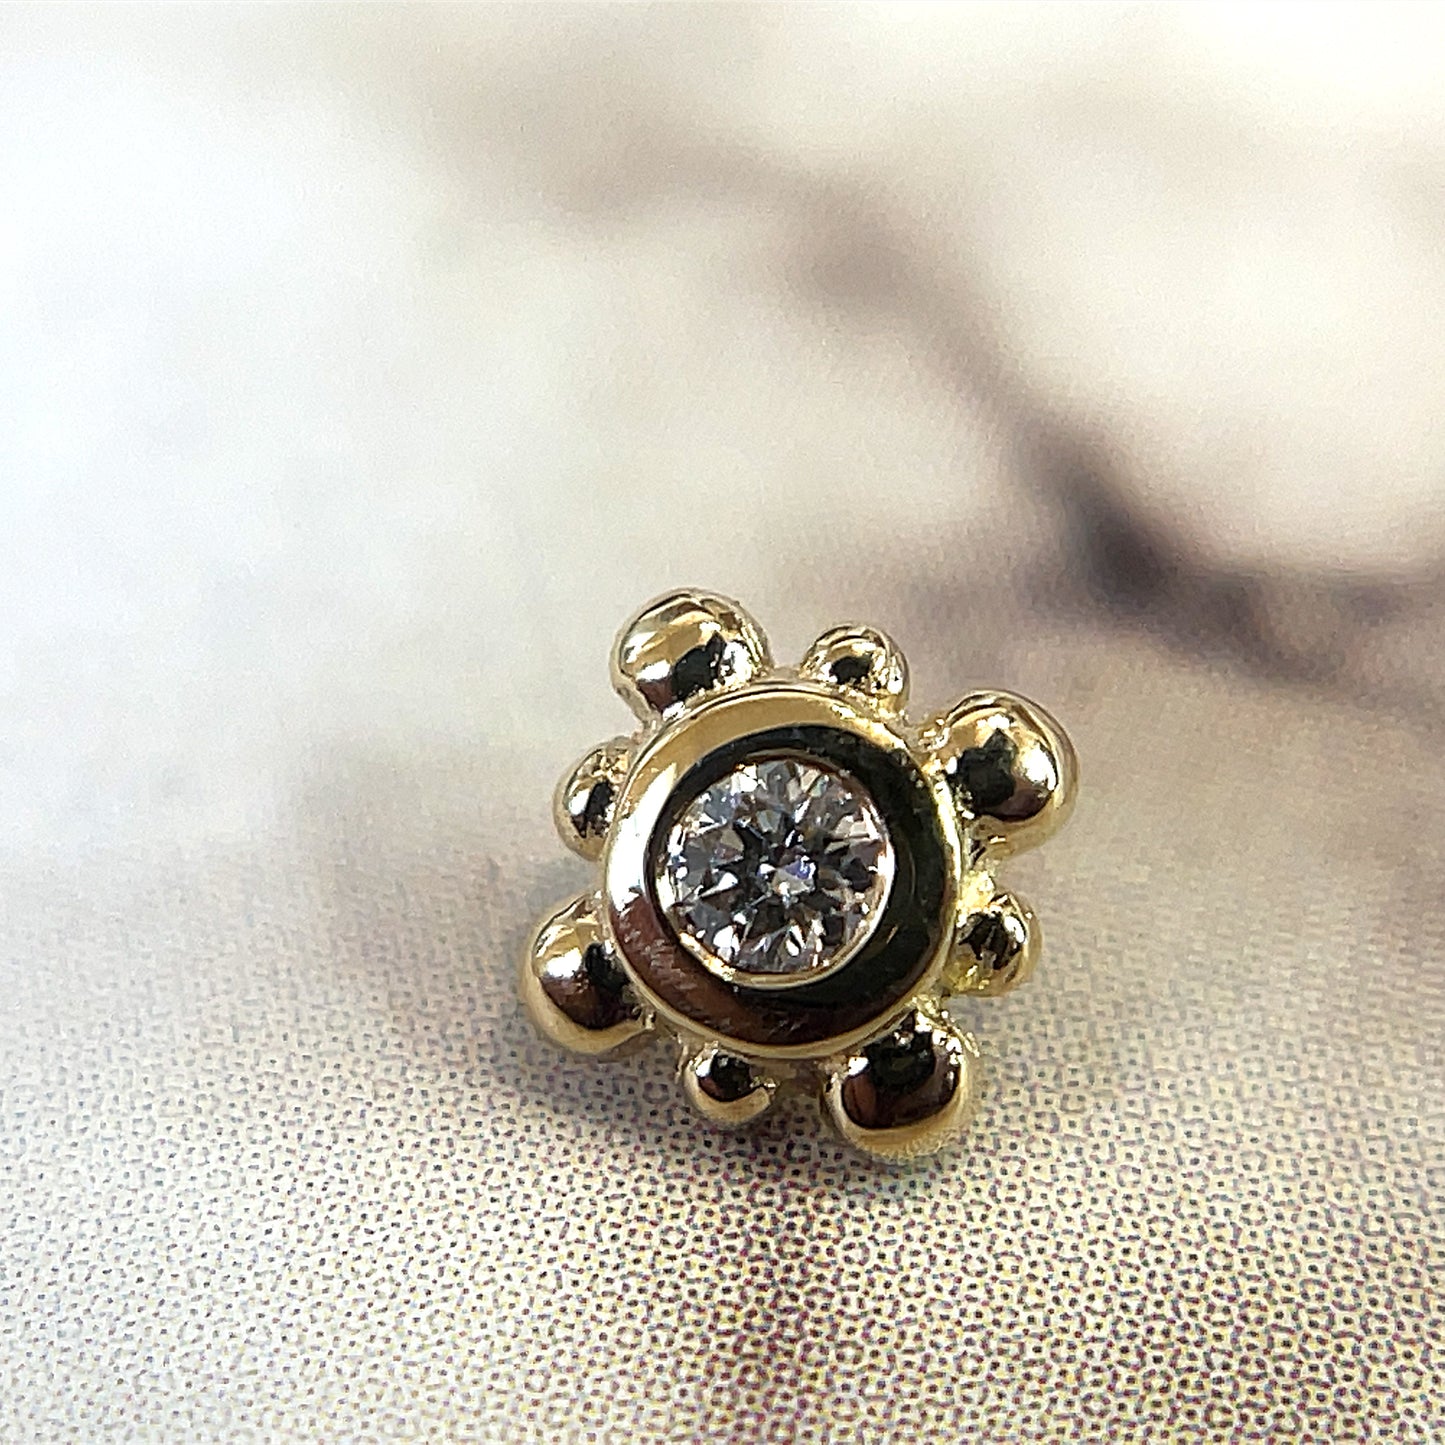 Round Bezel Surrounded by 8 Beads